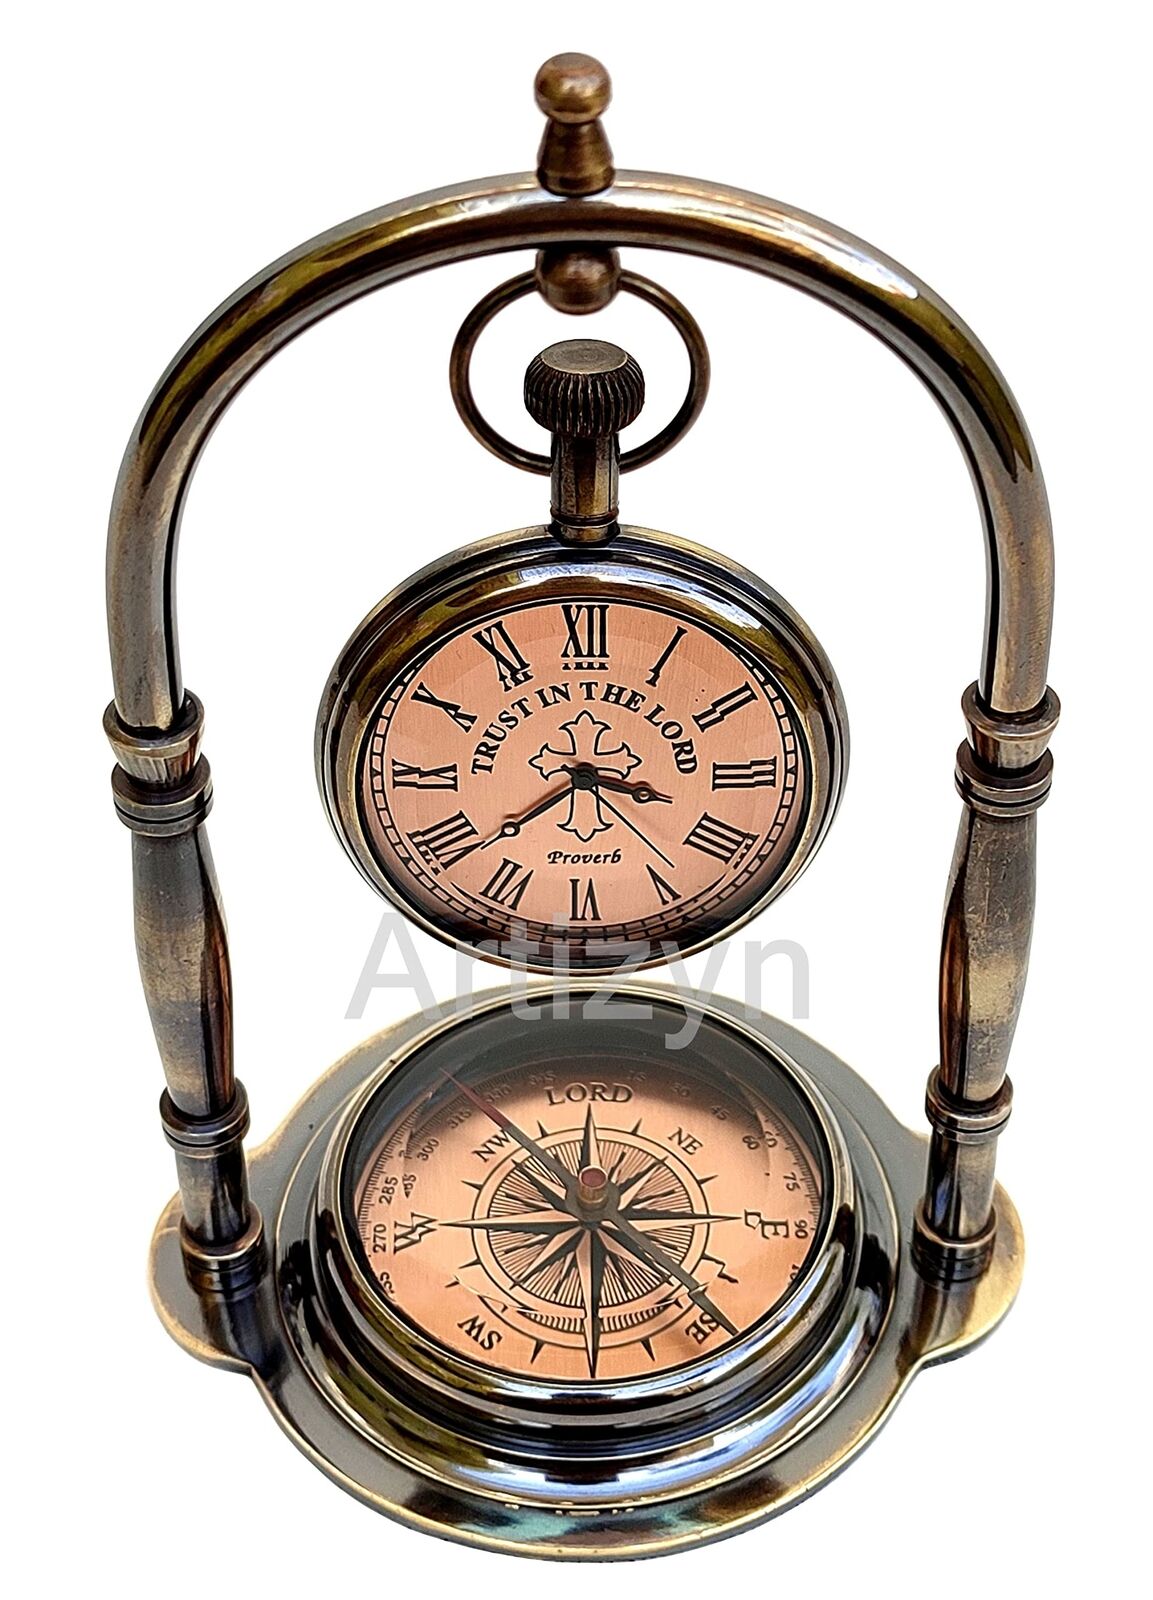 Trust in The Lord Engraved Brass Ship Desk Clock Nautical Camping Compass Rel...